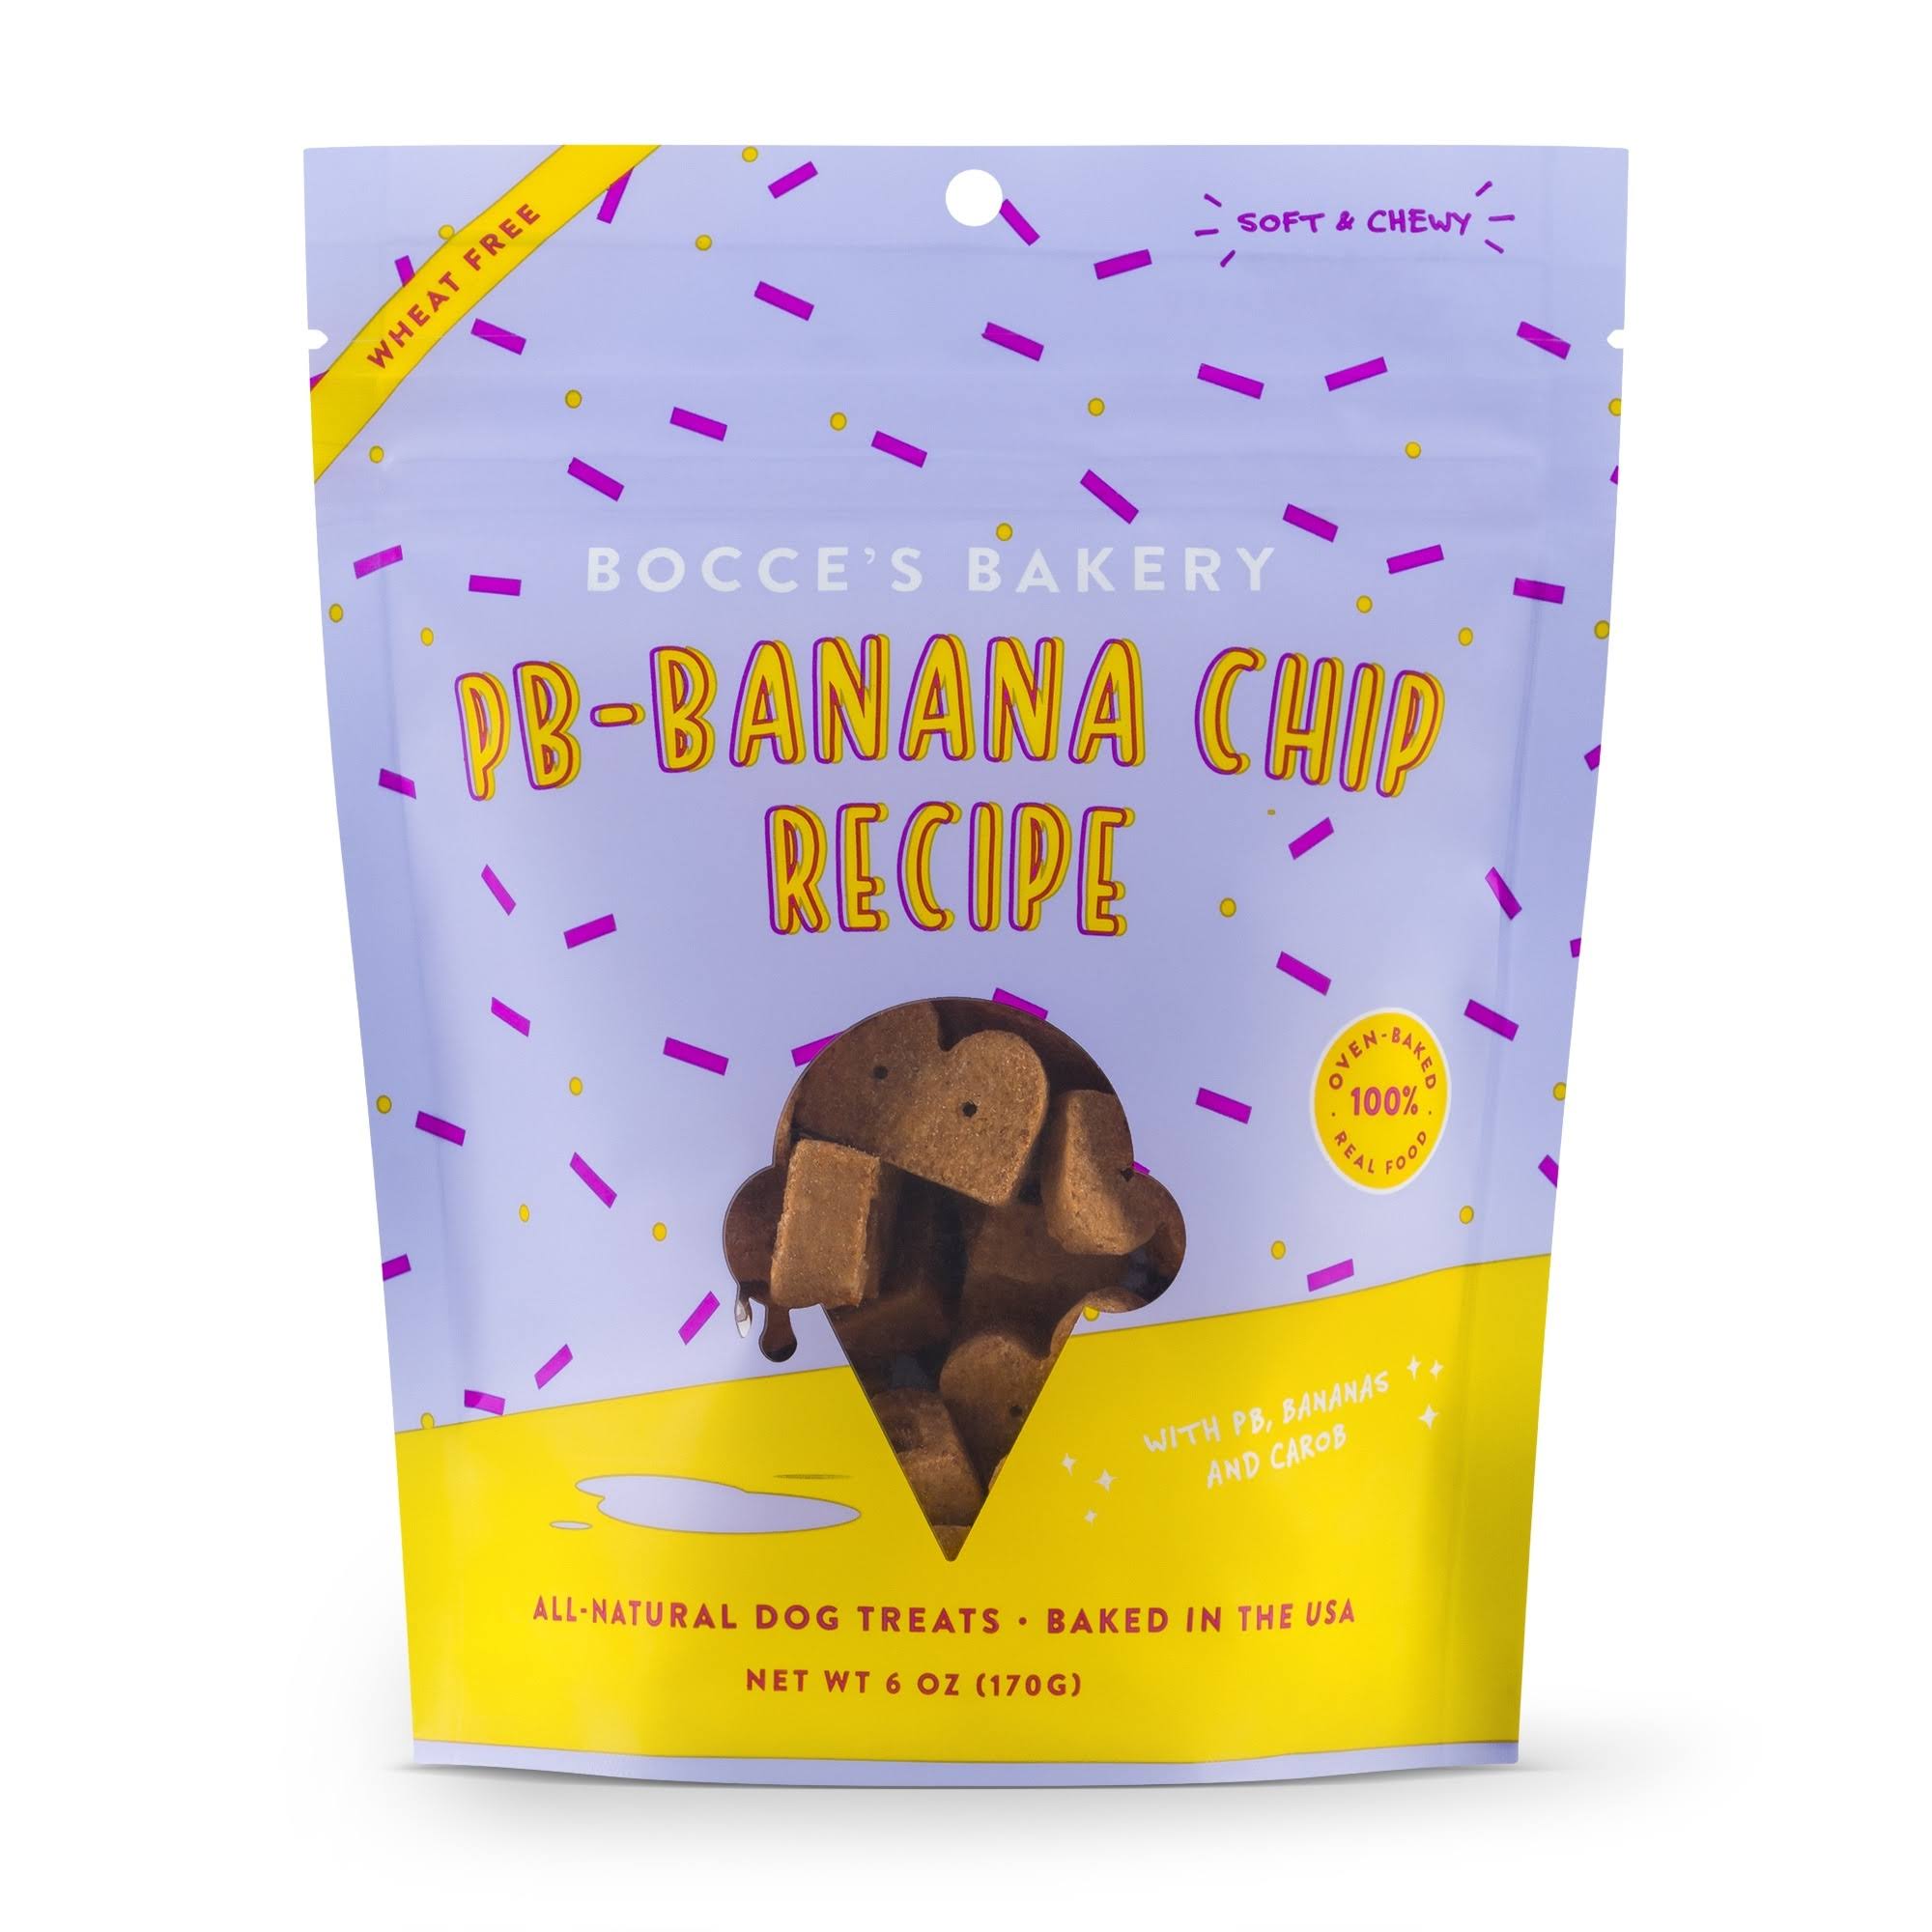 Bocce's Bakery Scoop Shop Soft & Chewy Dog Treat - Pb & Banana Chip - 6 oz Bag